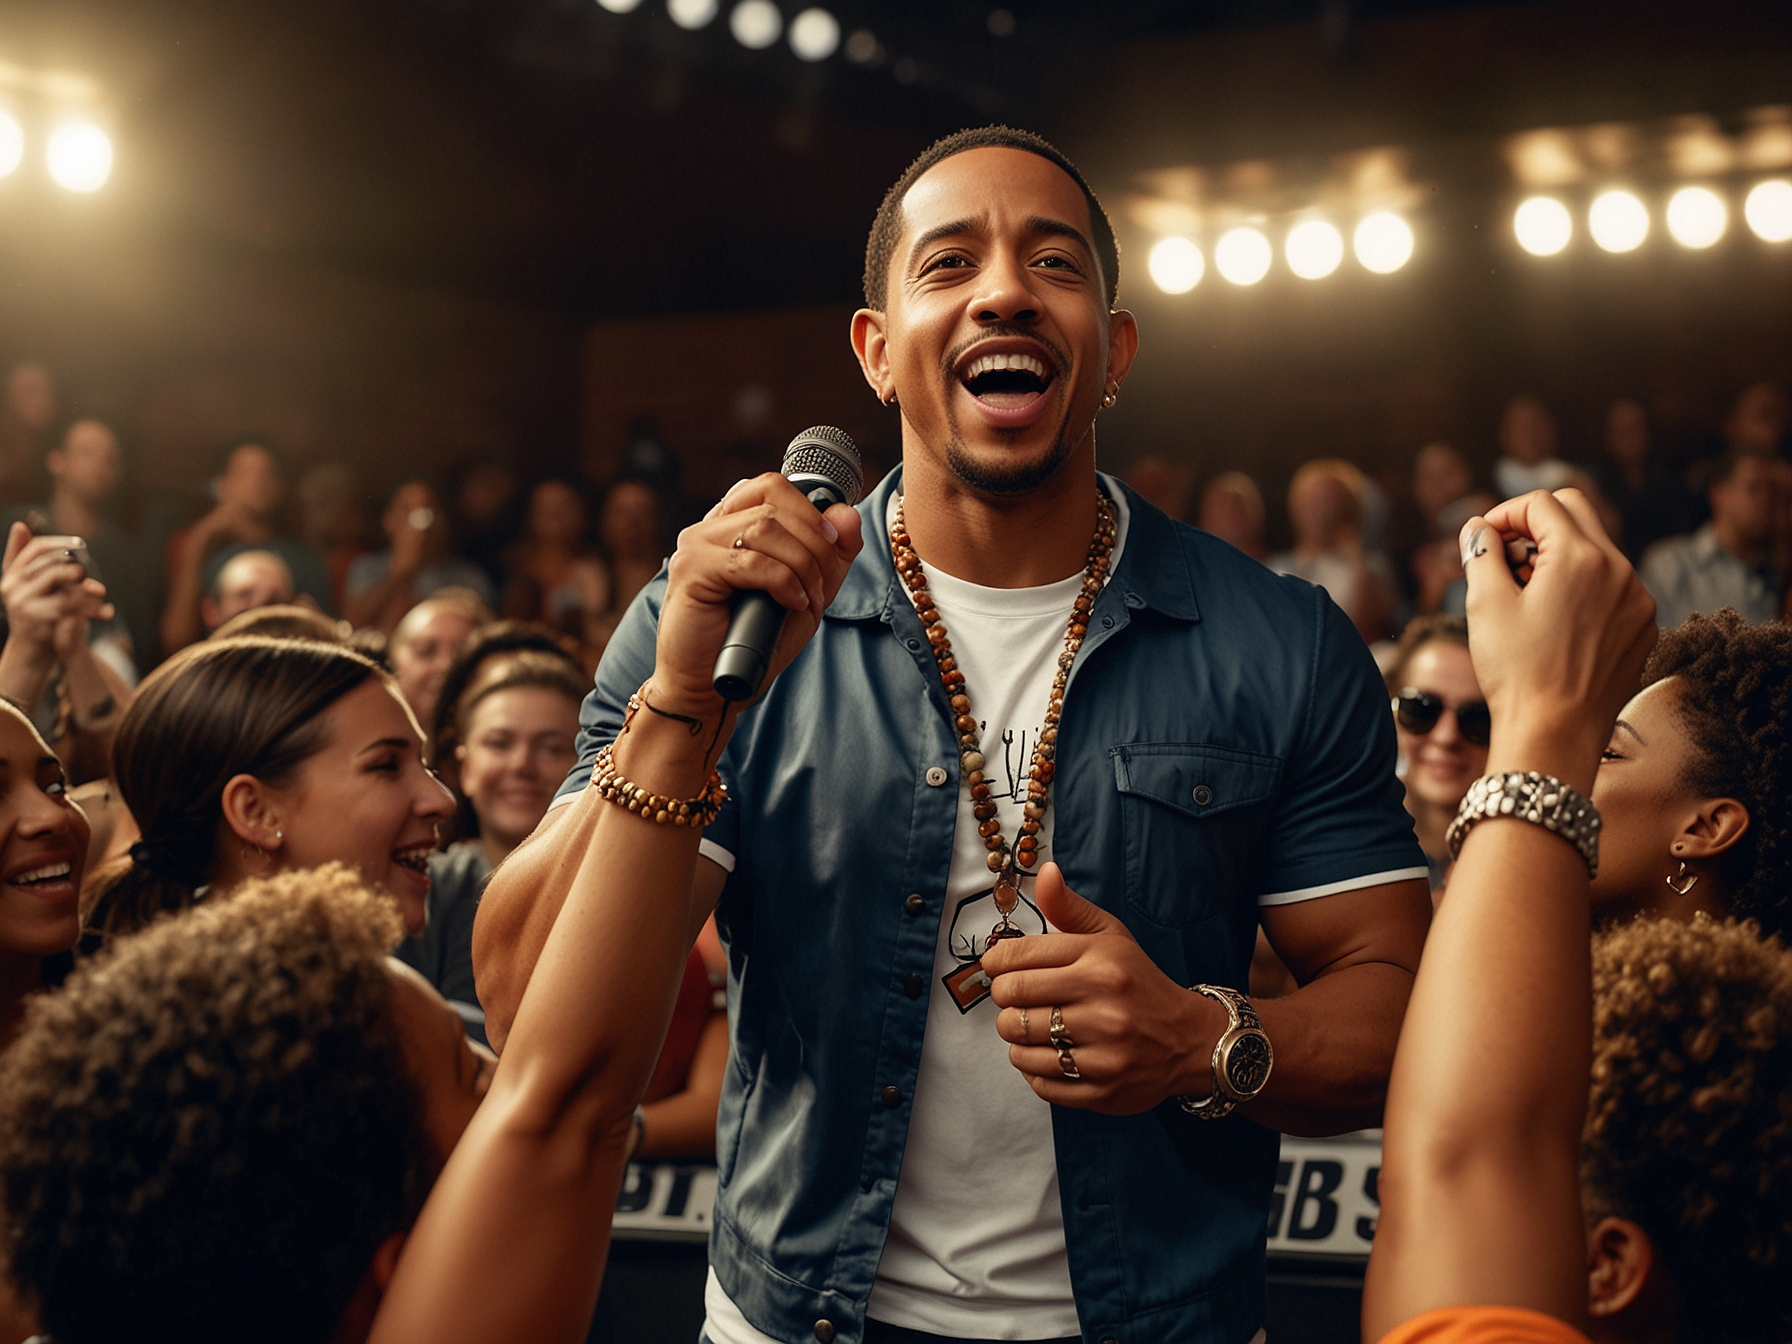 Ludacris passionately performs with a JBL speaker at an impromptu concert, illustrating the dynamic sound quality and connection with his fans despite the Milwaukee show cancellation.